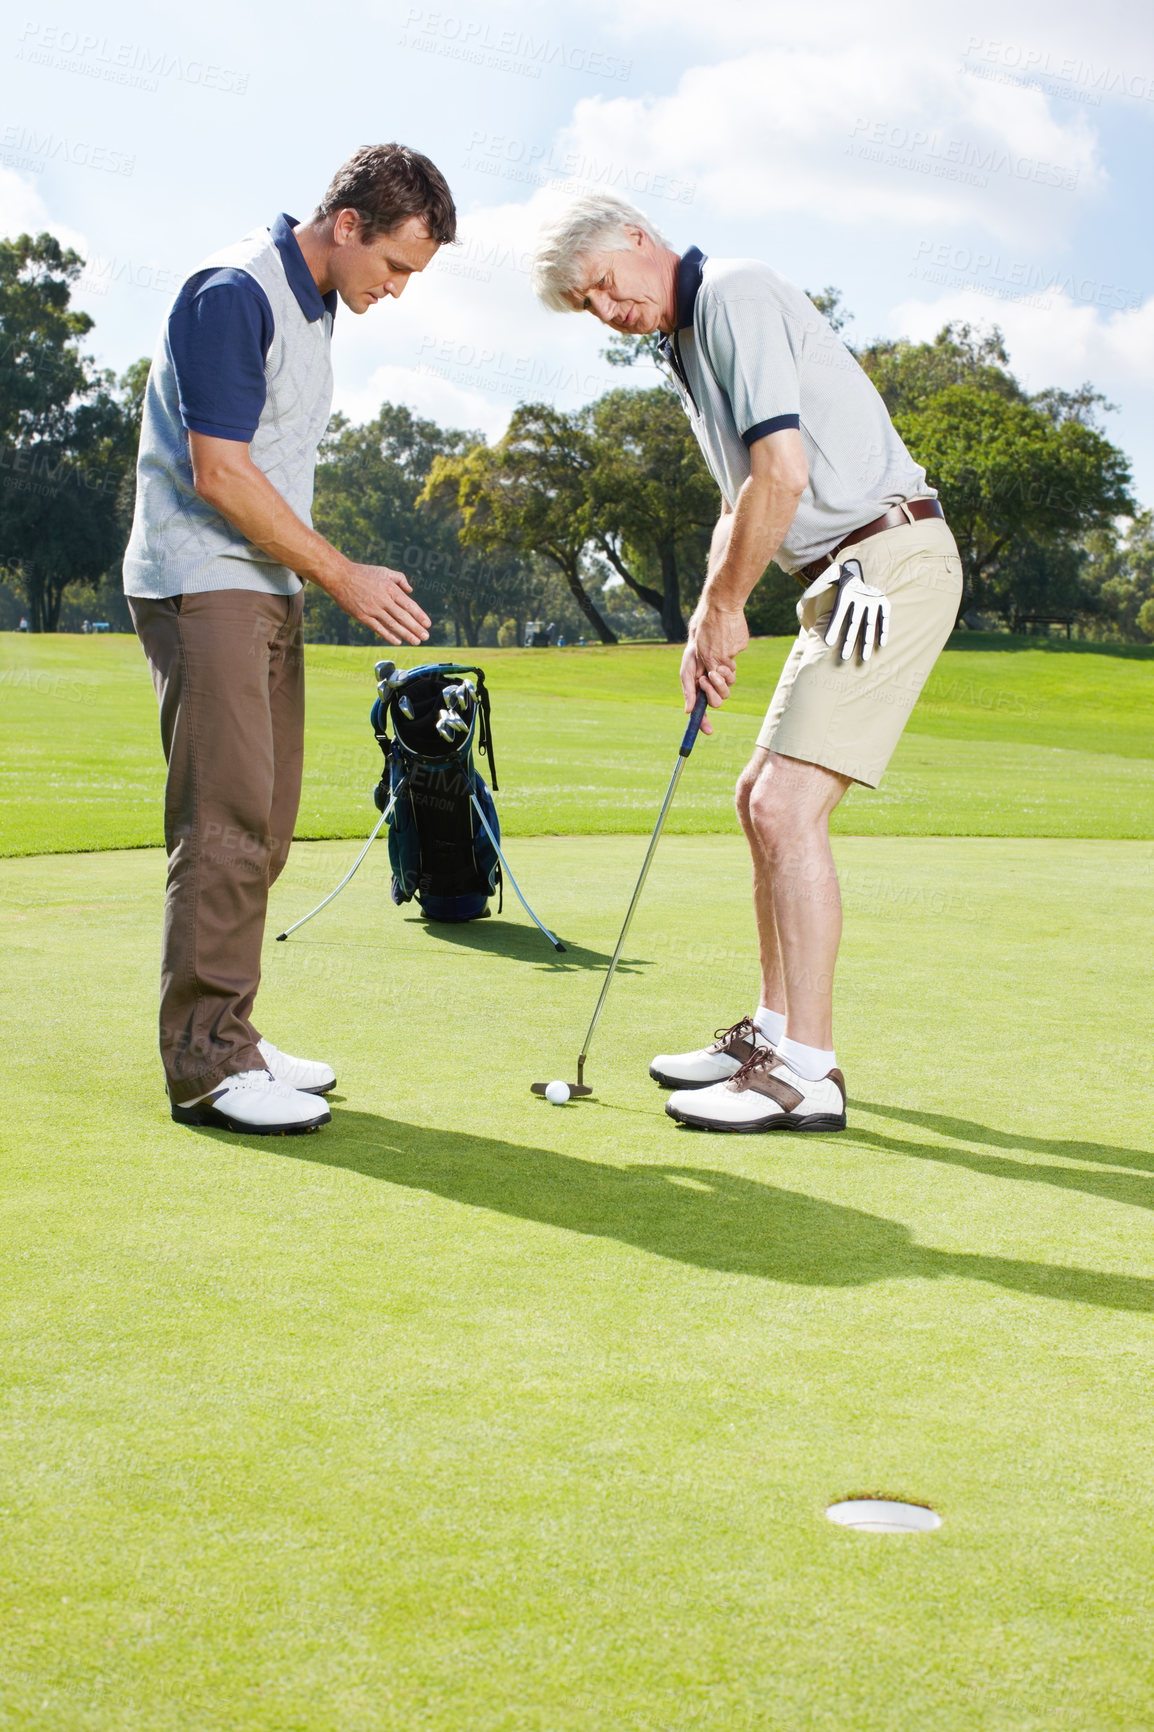 Buy stock photo Two men playing a round of golf together on the green